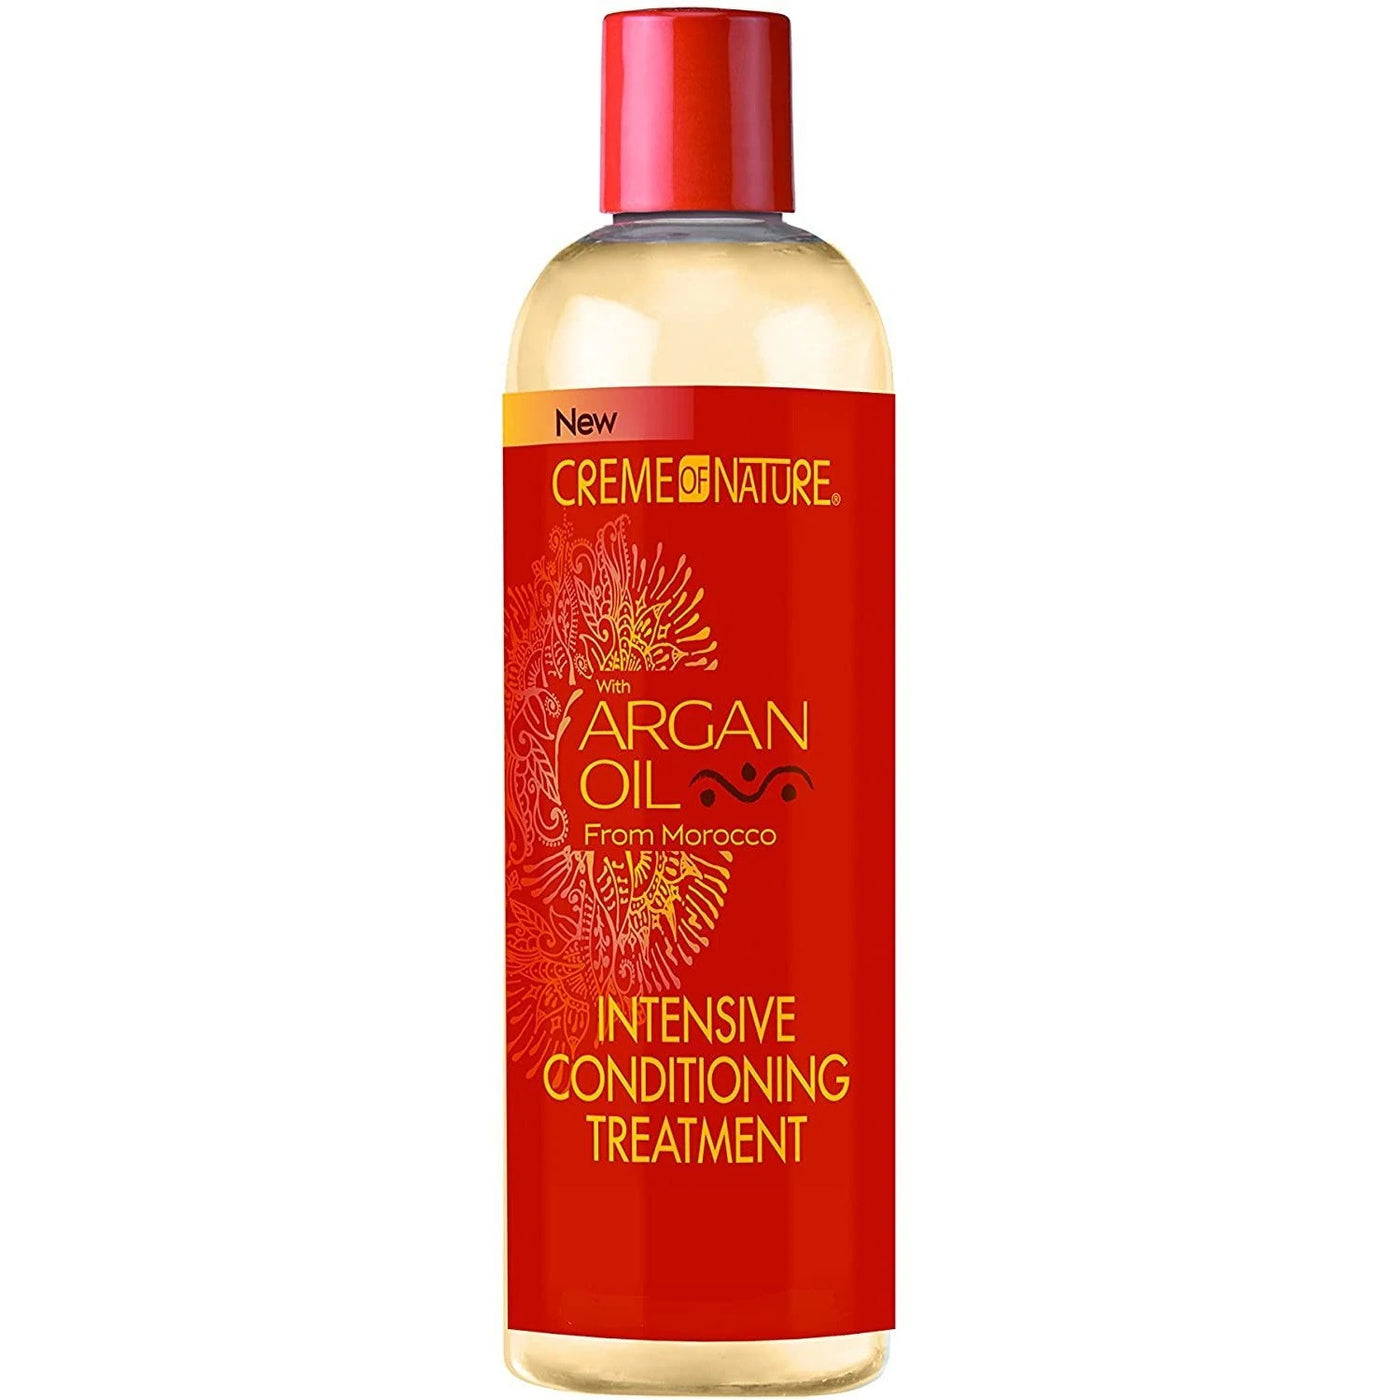 Creme of Nature Argan Oil Intensive Conditioning Treatment 12oz - Sfbeautybar